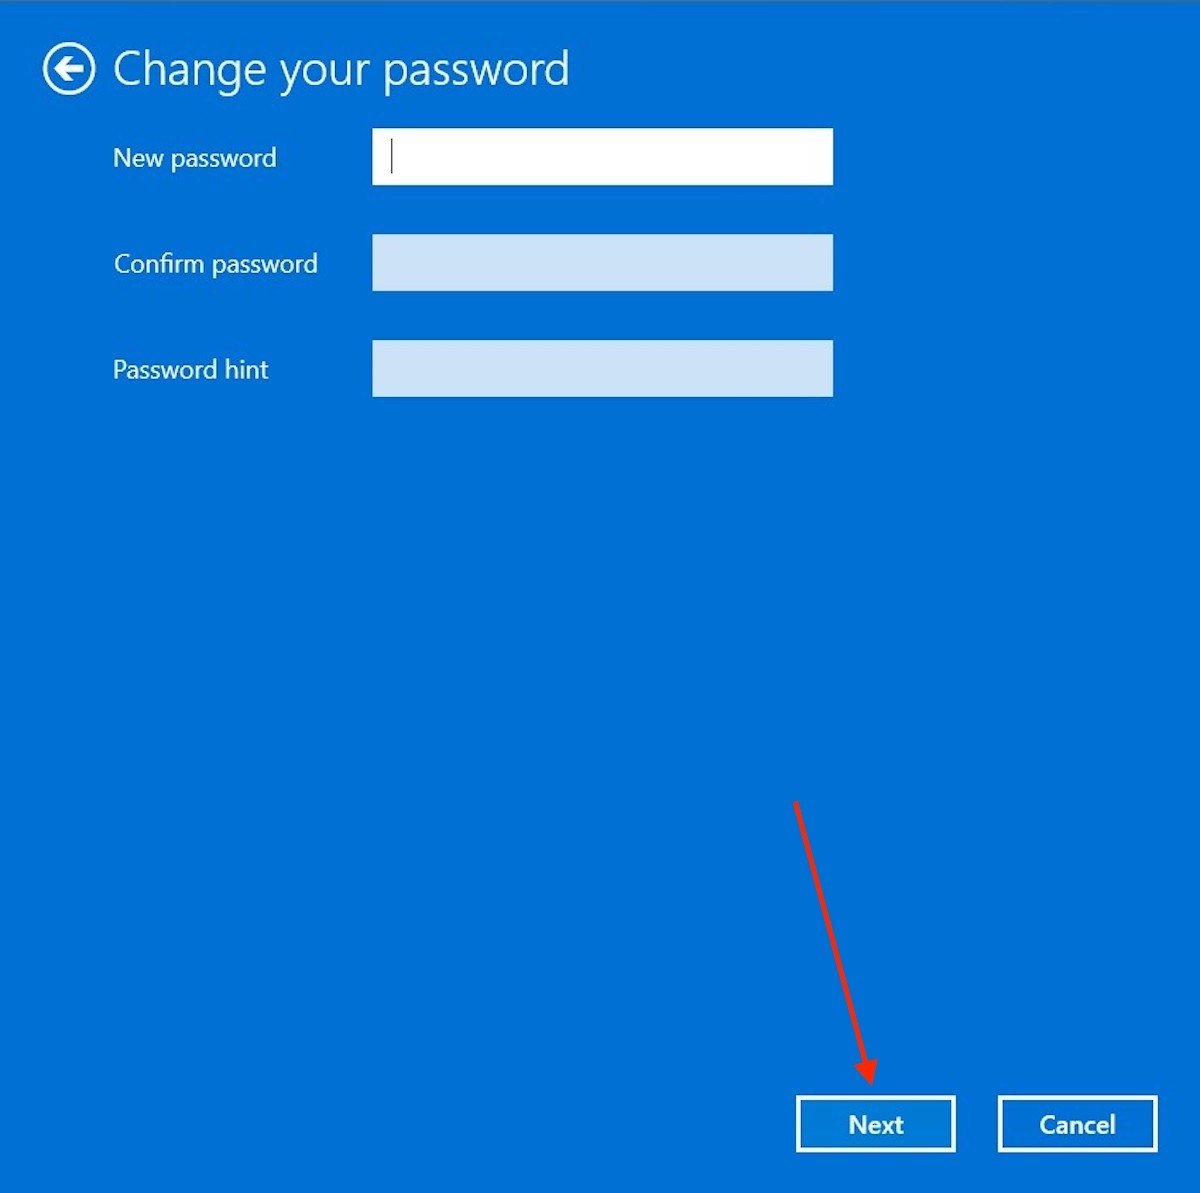 Leave the new password fields empty